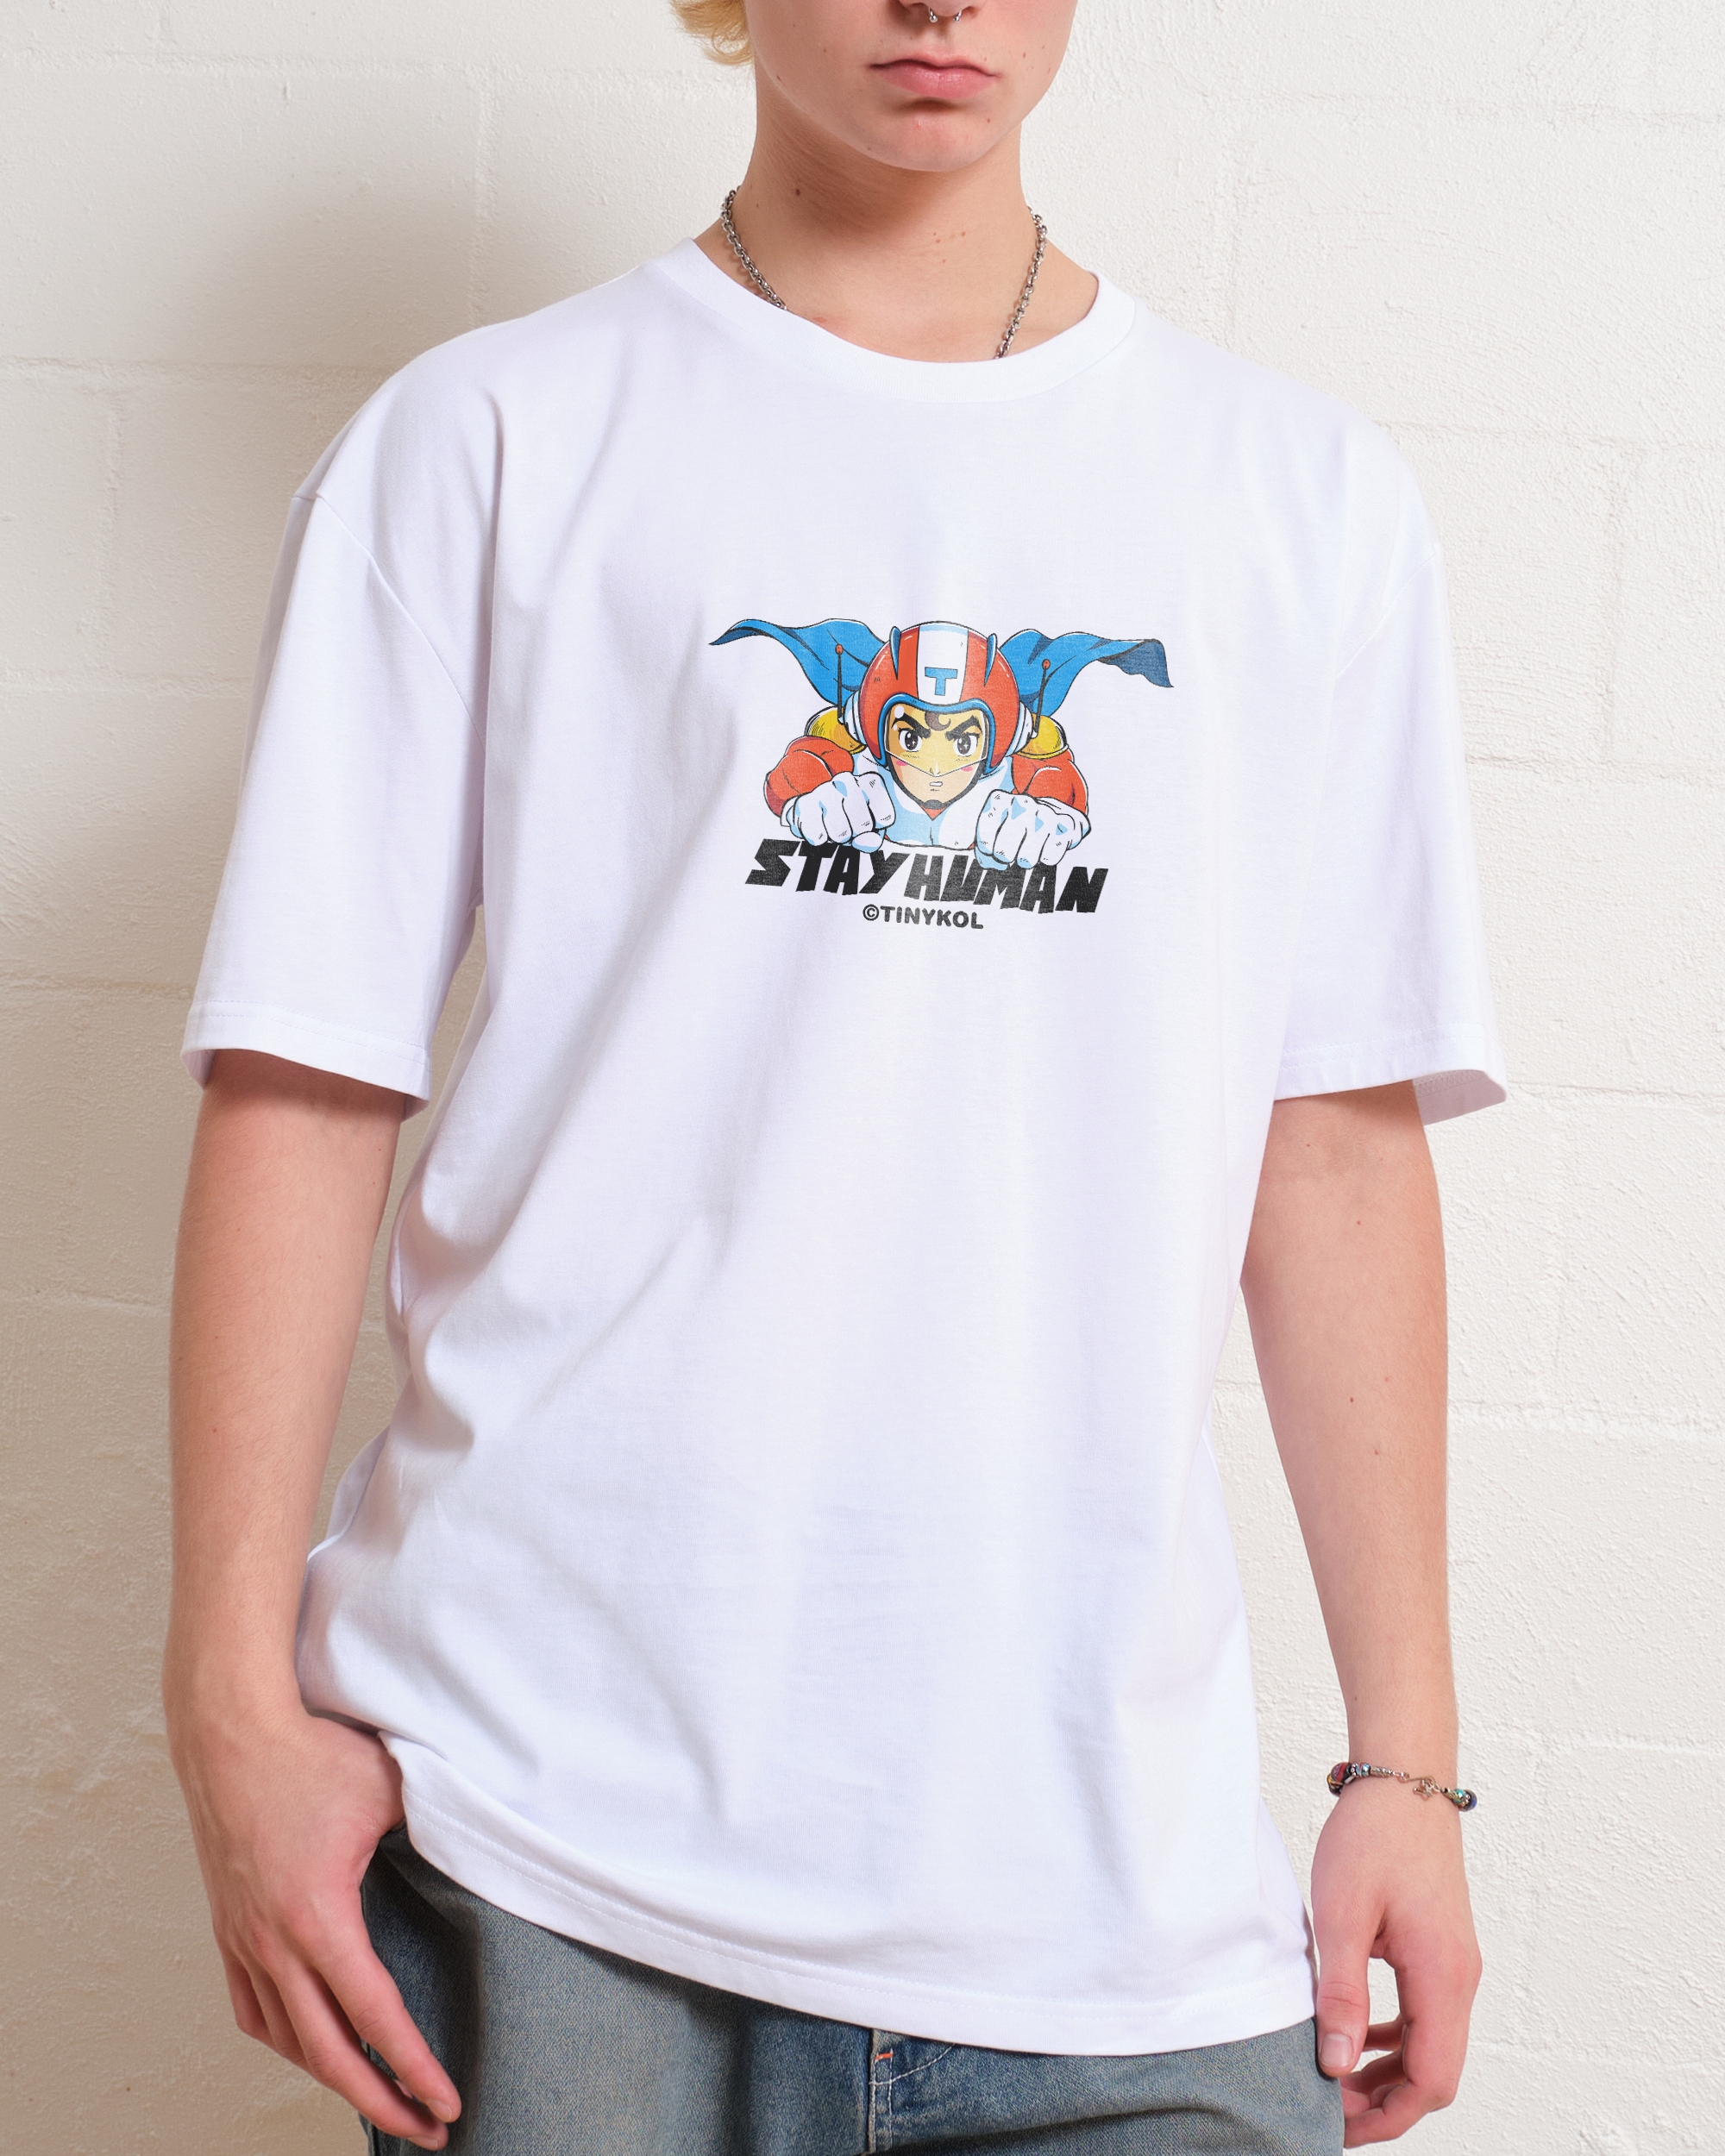 Hector - Stay Human T-Shirt